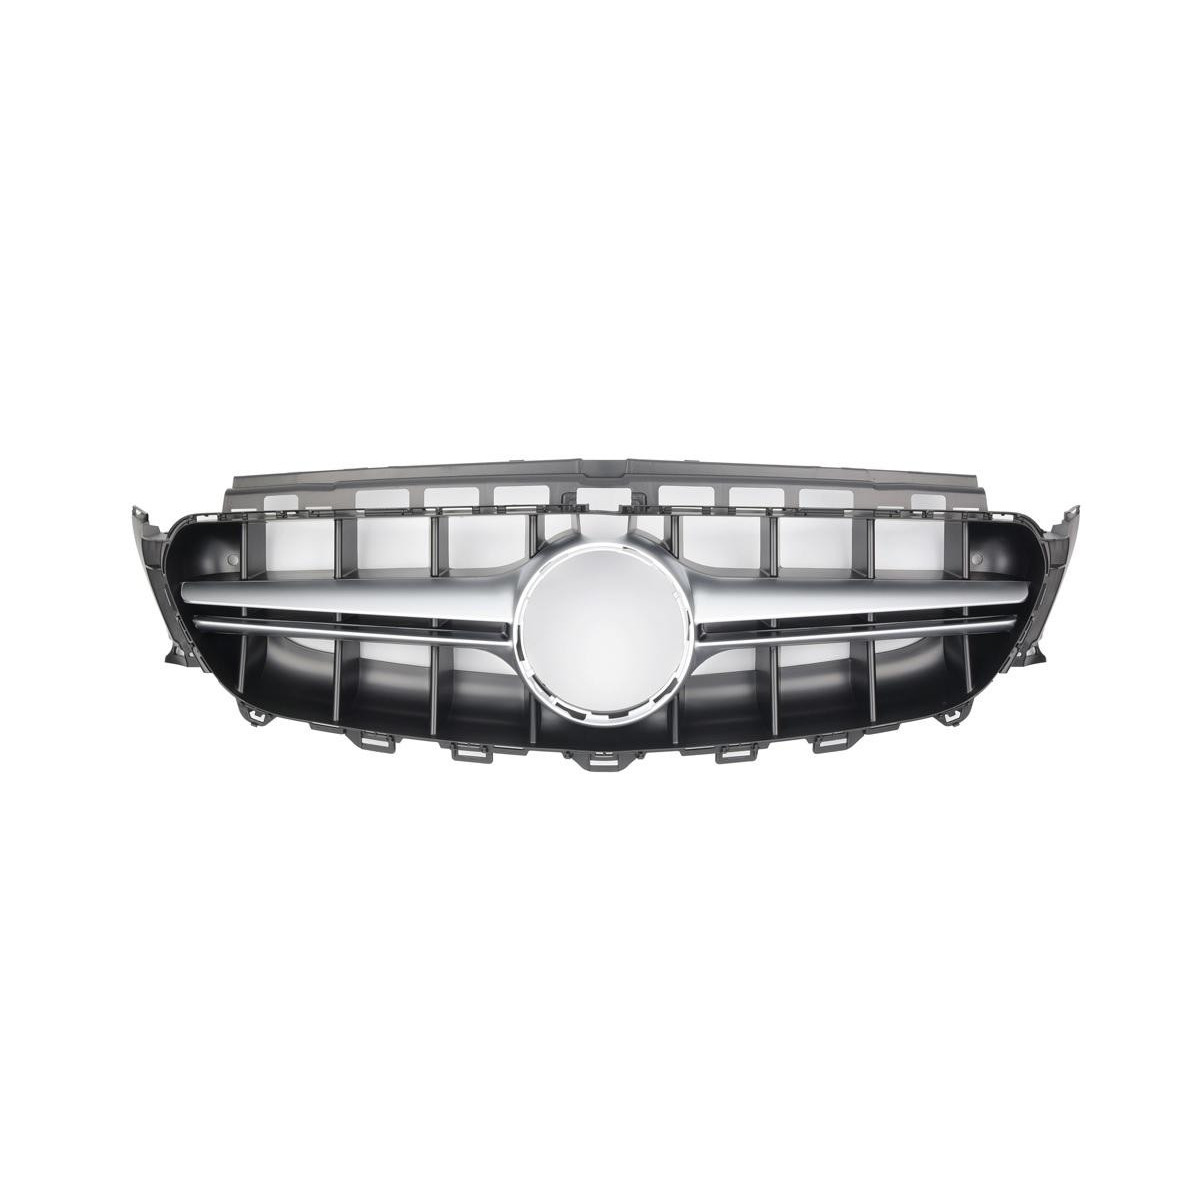 GRILL MERCEDES W213 S213 A238 E 16- AMG LOOK SILVER